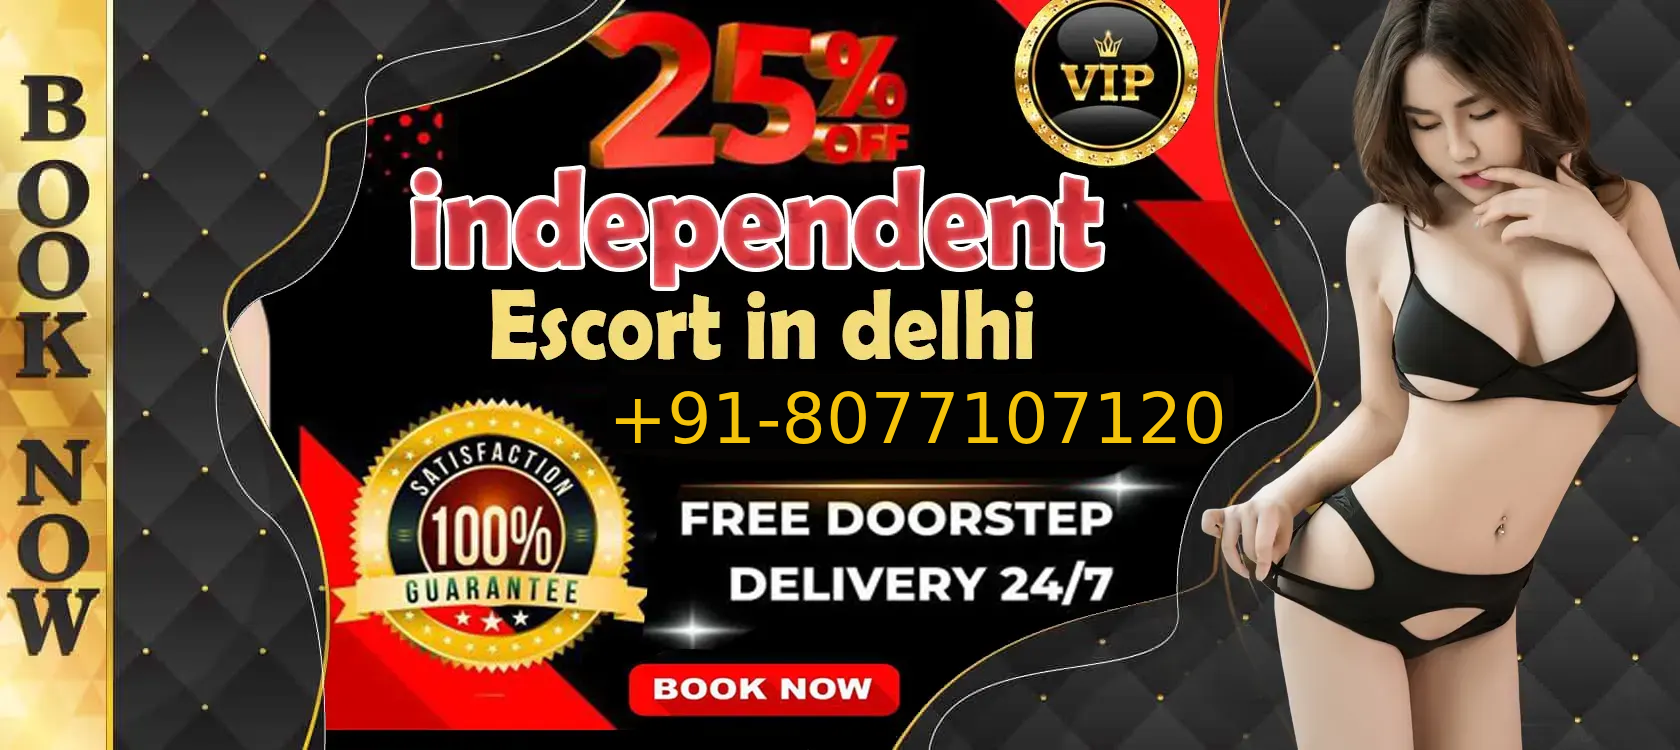 New friends colony Escorts Banner